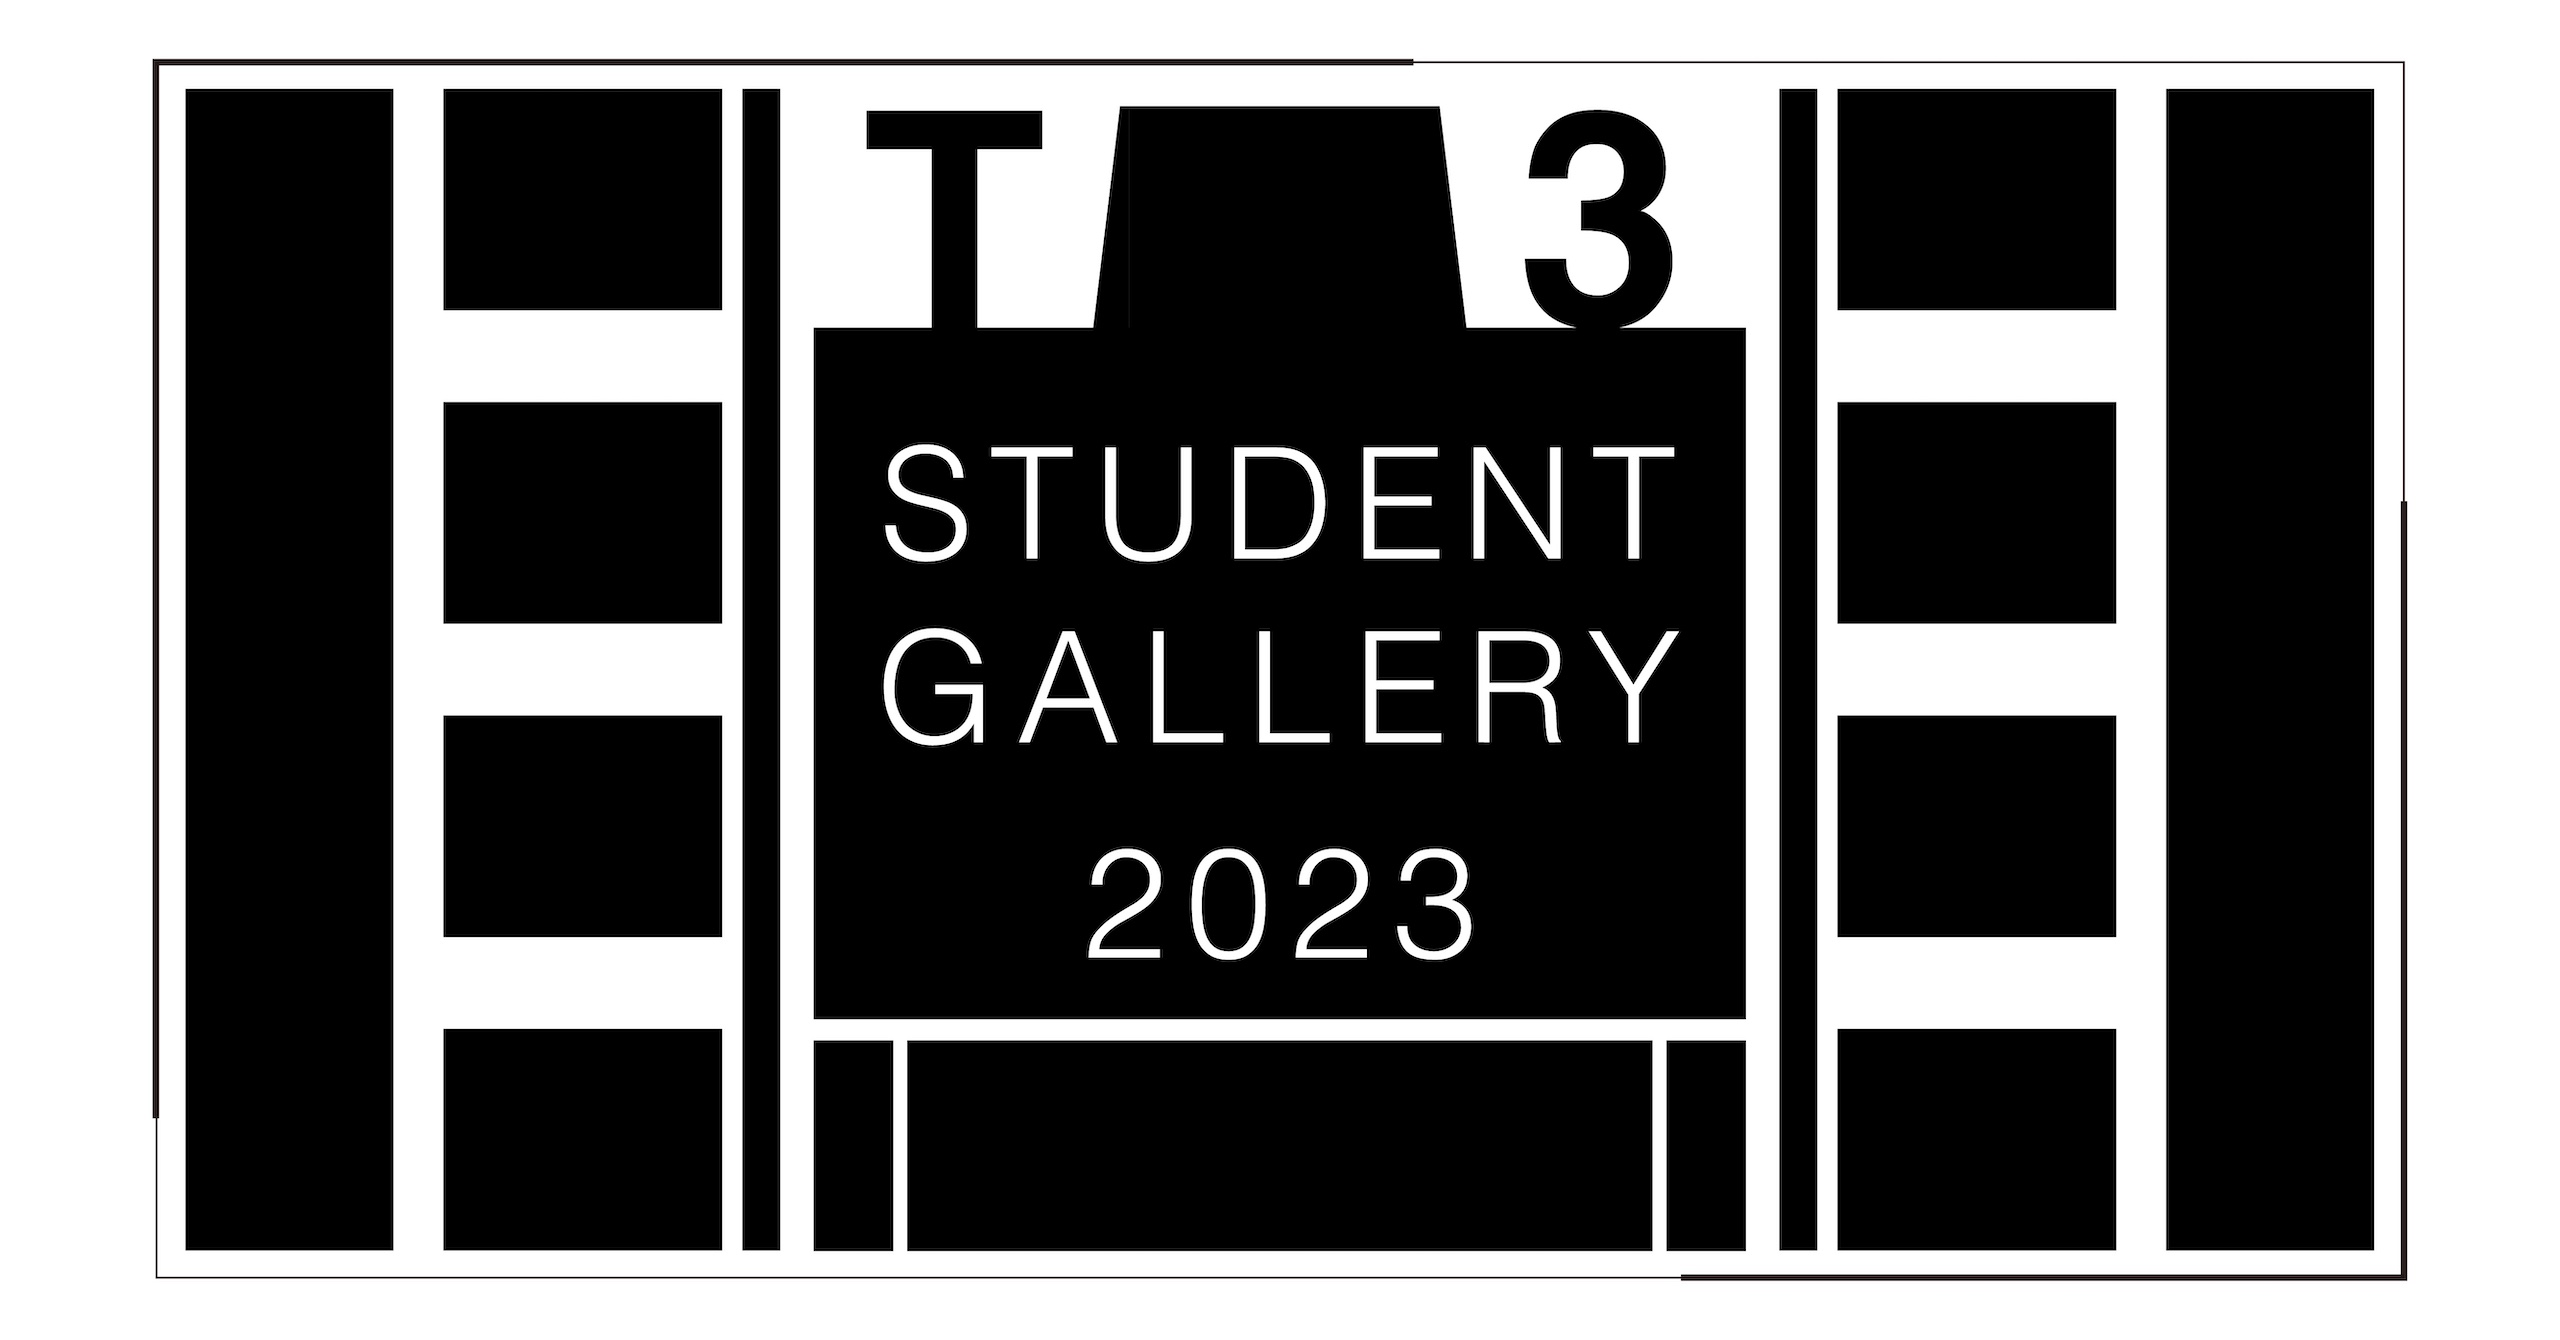 T3 STUDENT GALLERY 2023